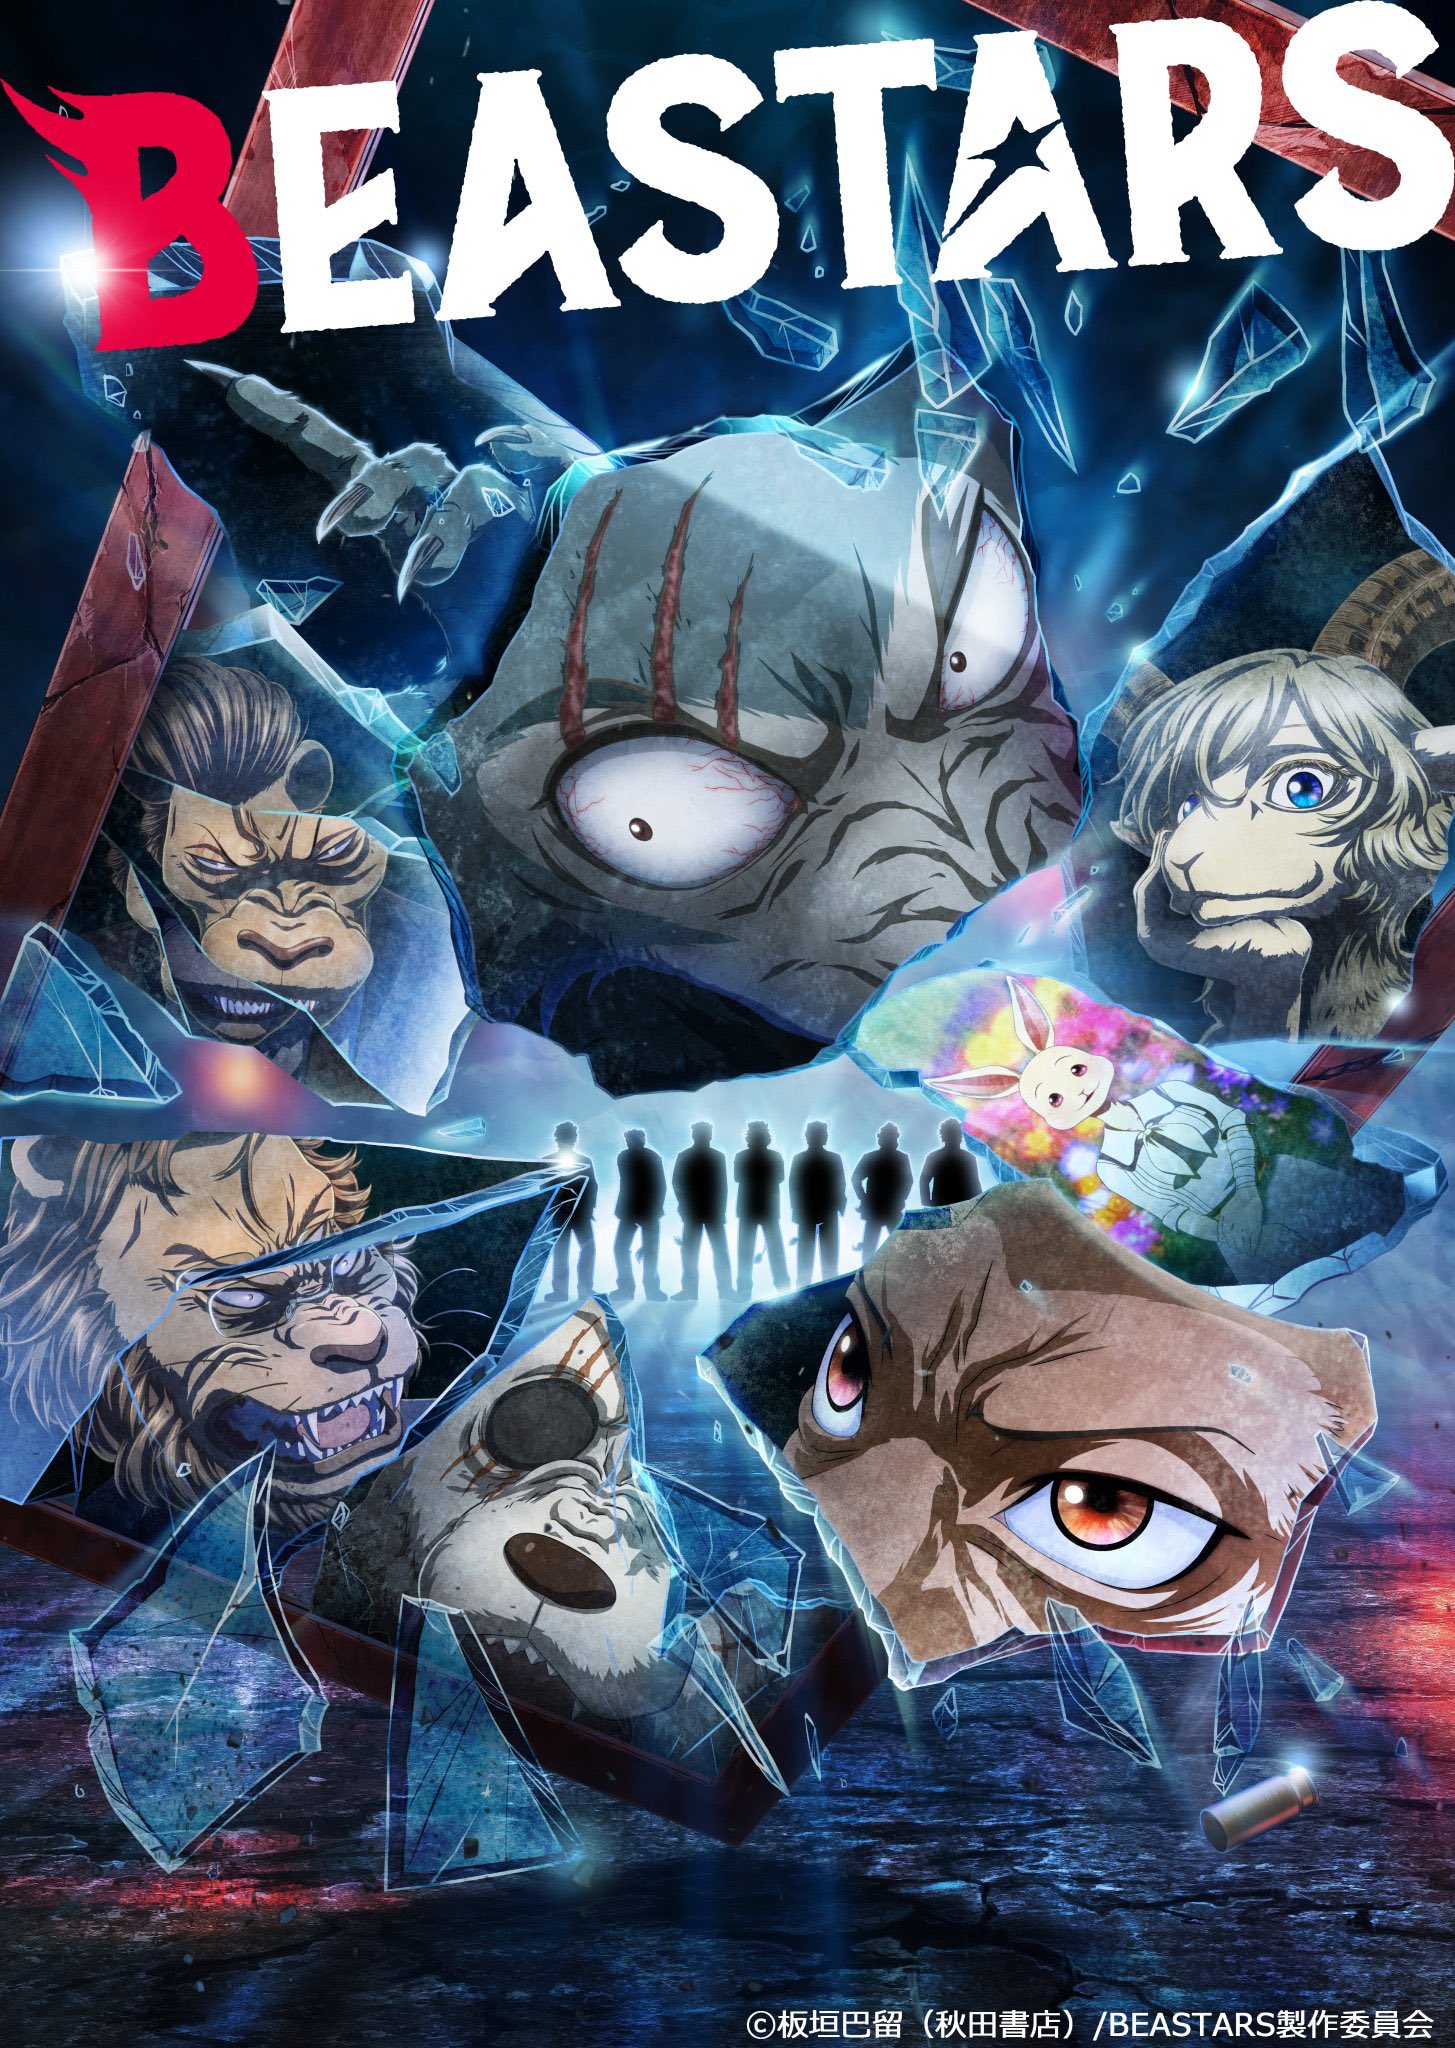 The key visual poster for the second season of the Beastars anime.